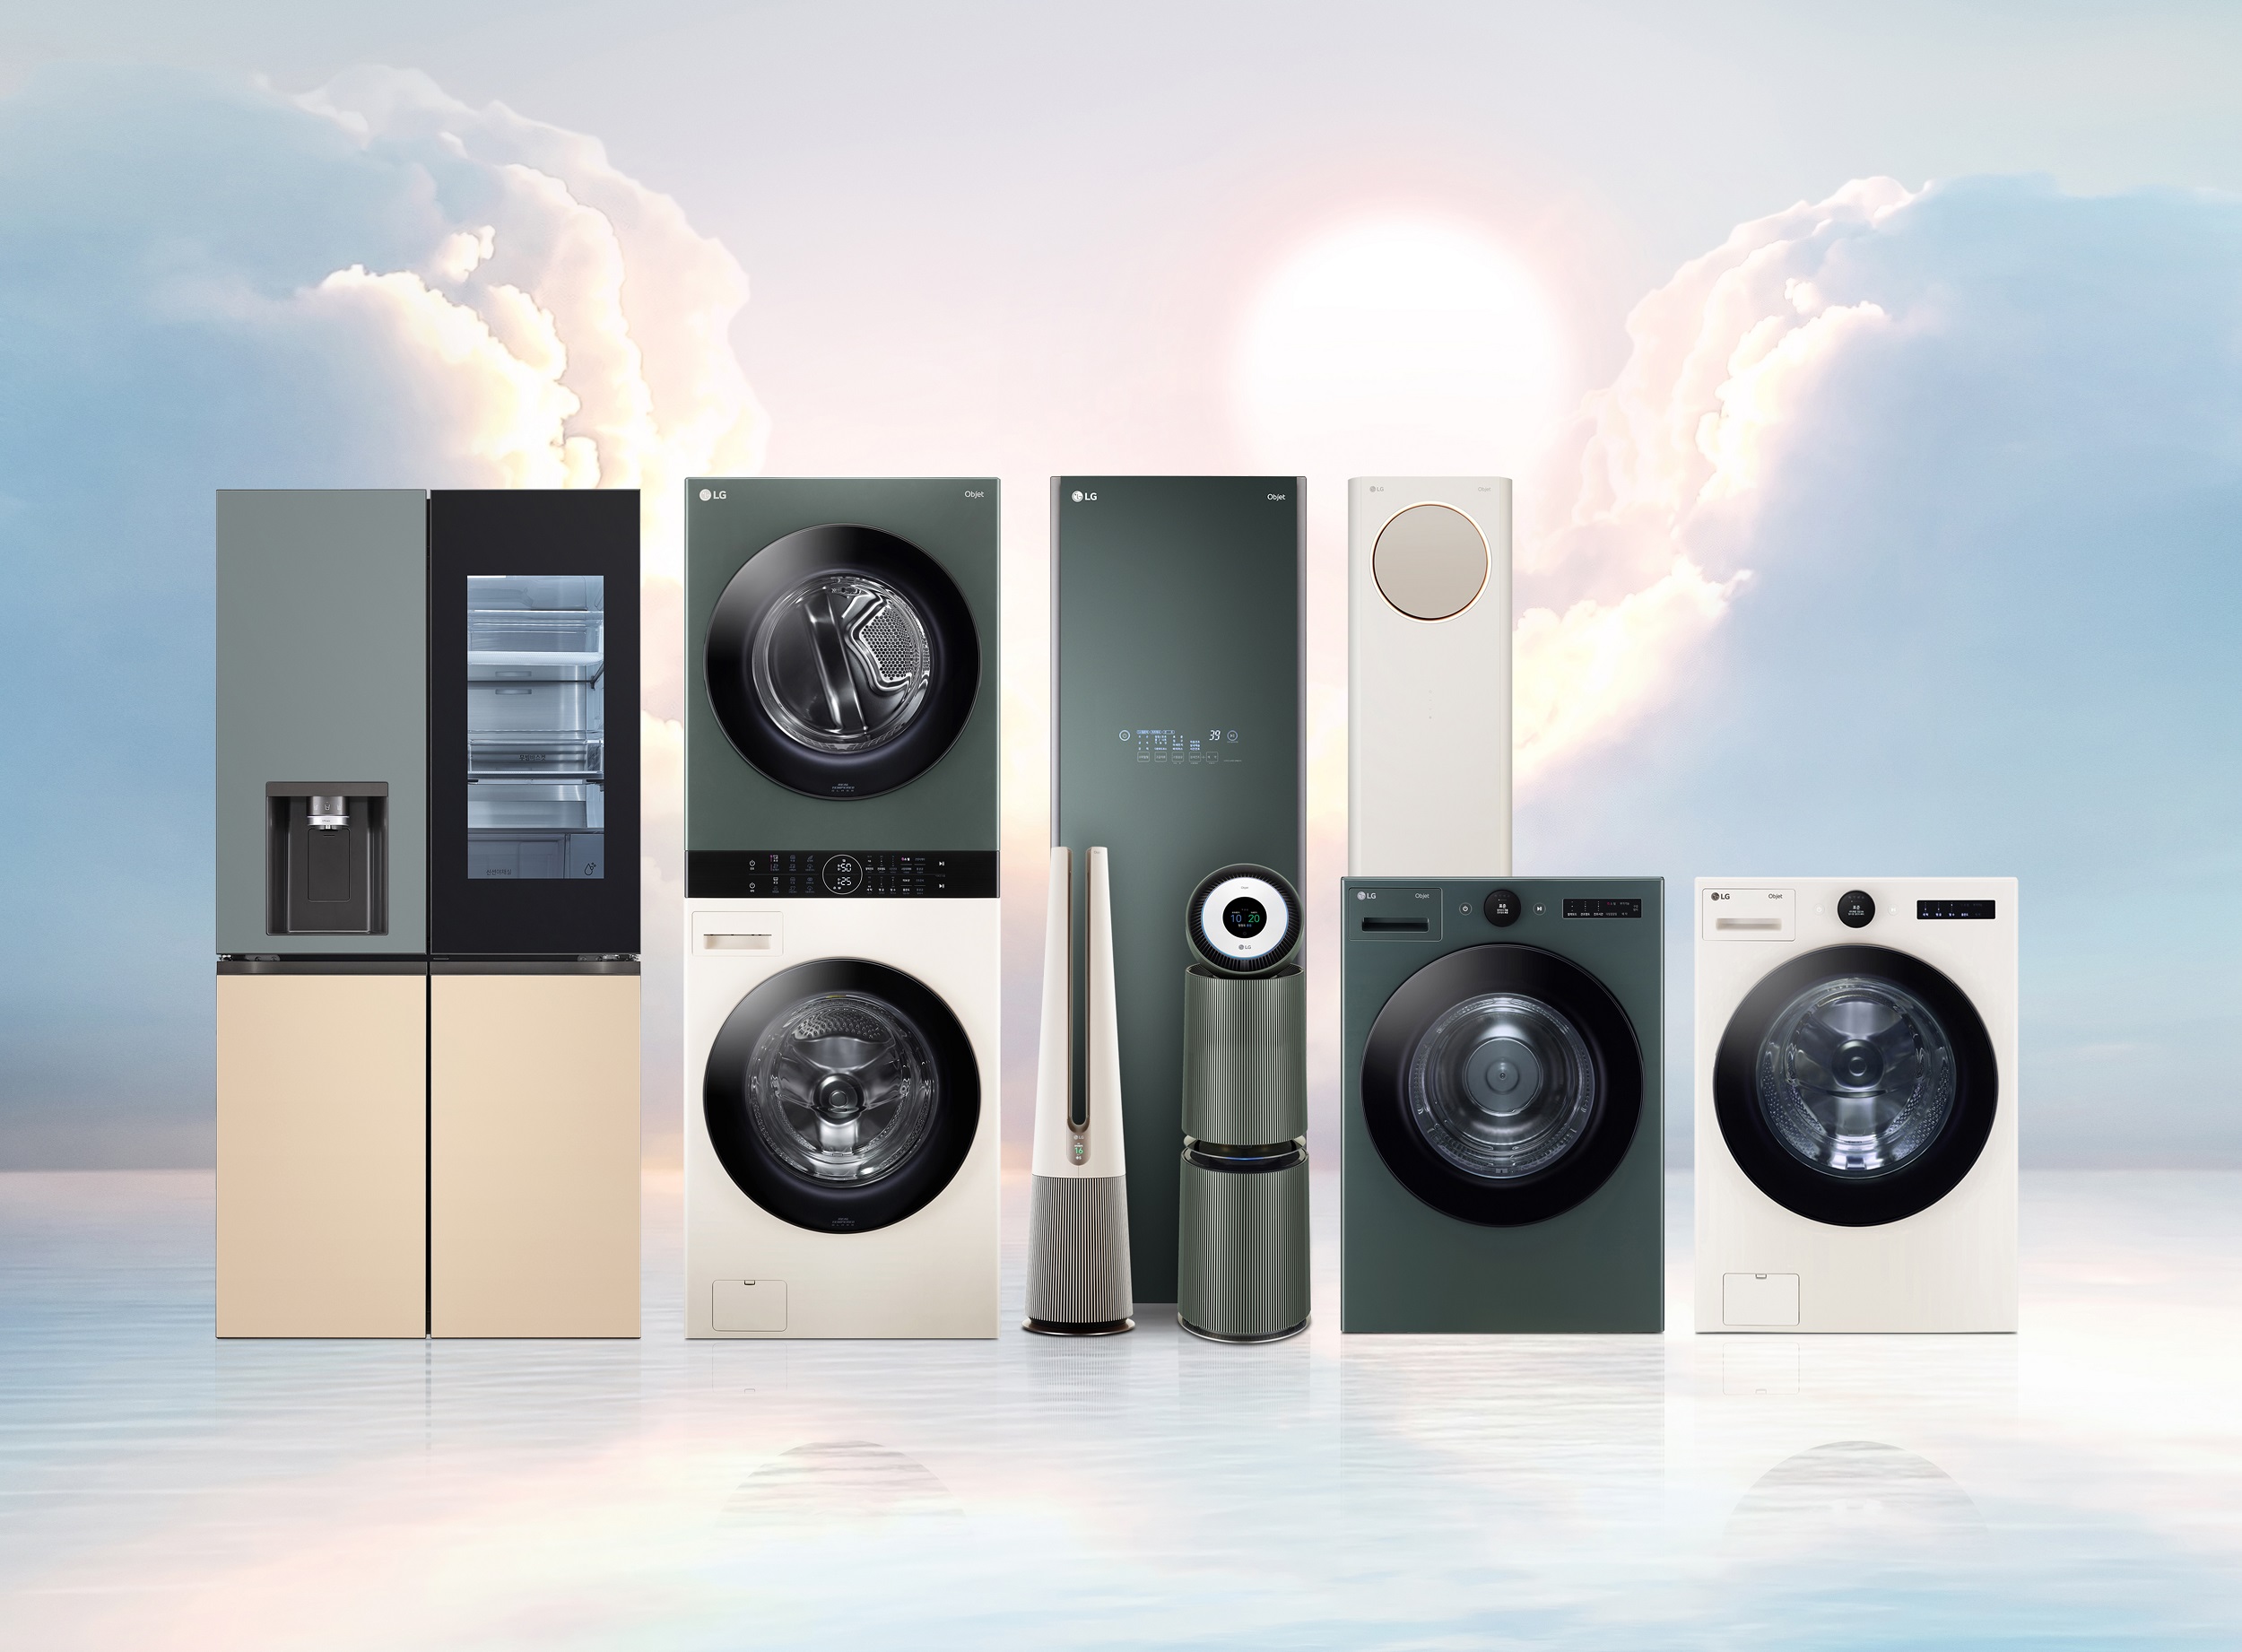 LG Sets New Paradigm With Upgradable Home Appliances That Deliver